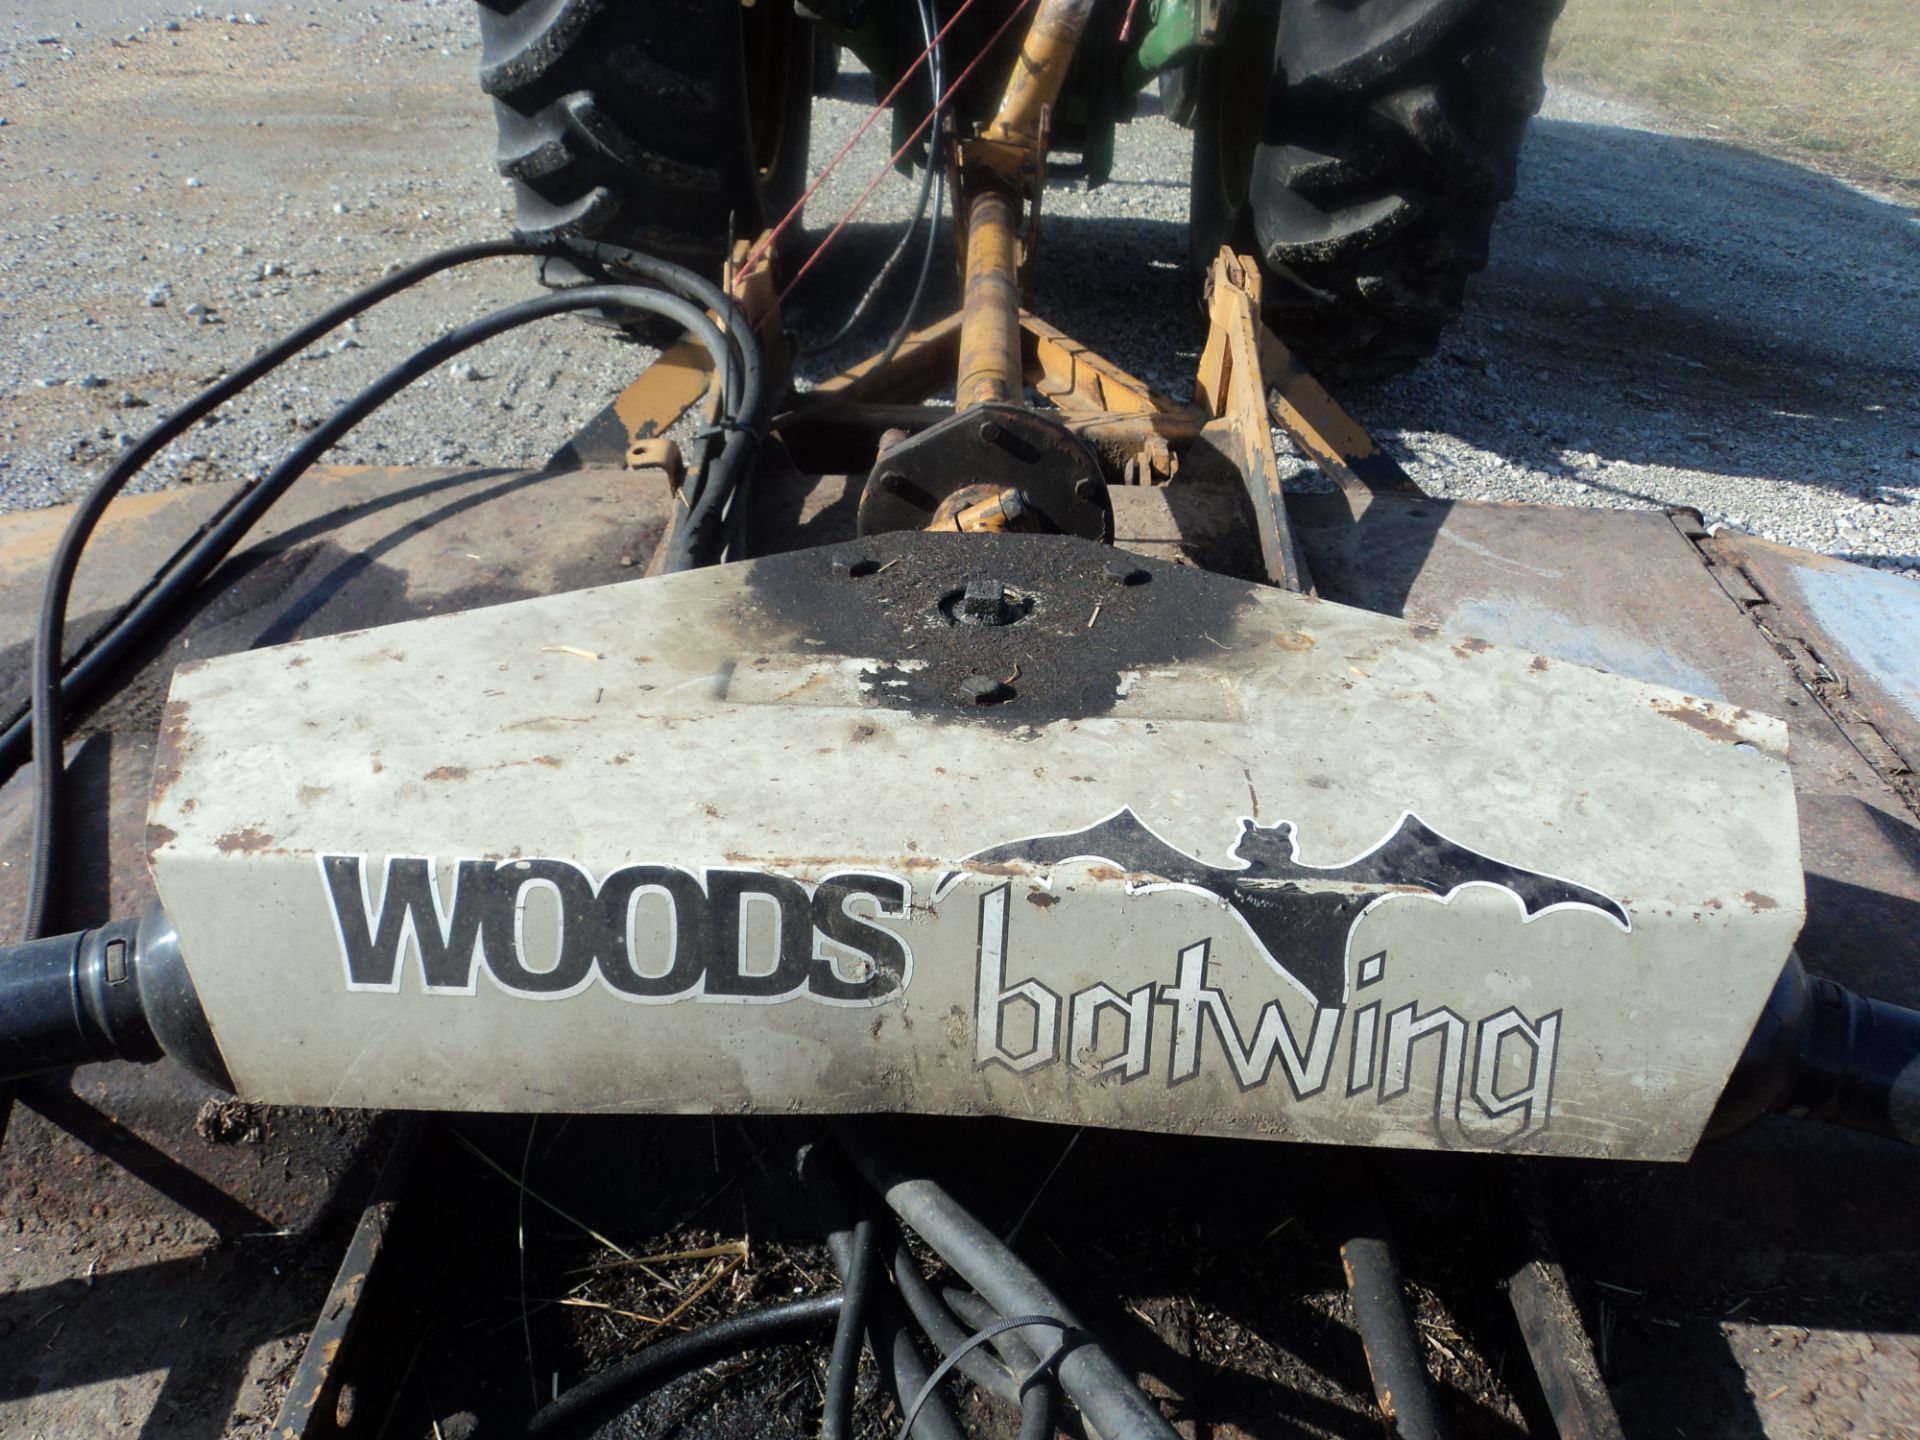 15' Woods HD 315 Batwing rotary mower, hyd fold, hyd lift, aircraft tires - Image 11 of 13